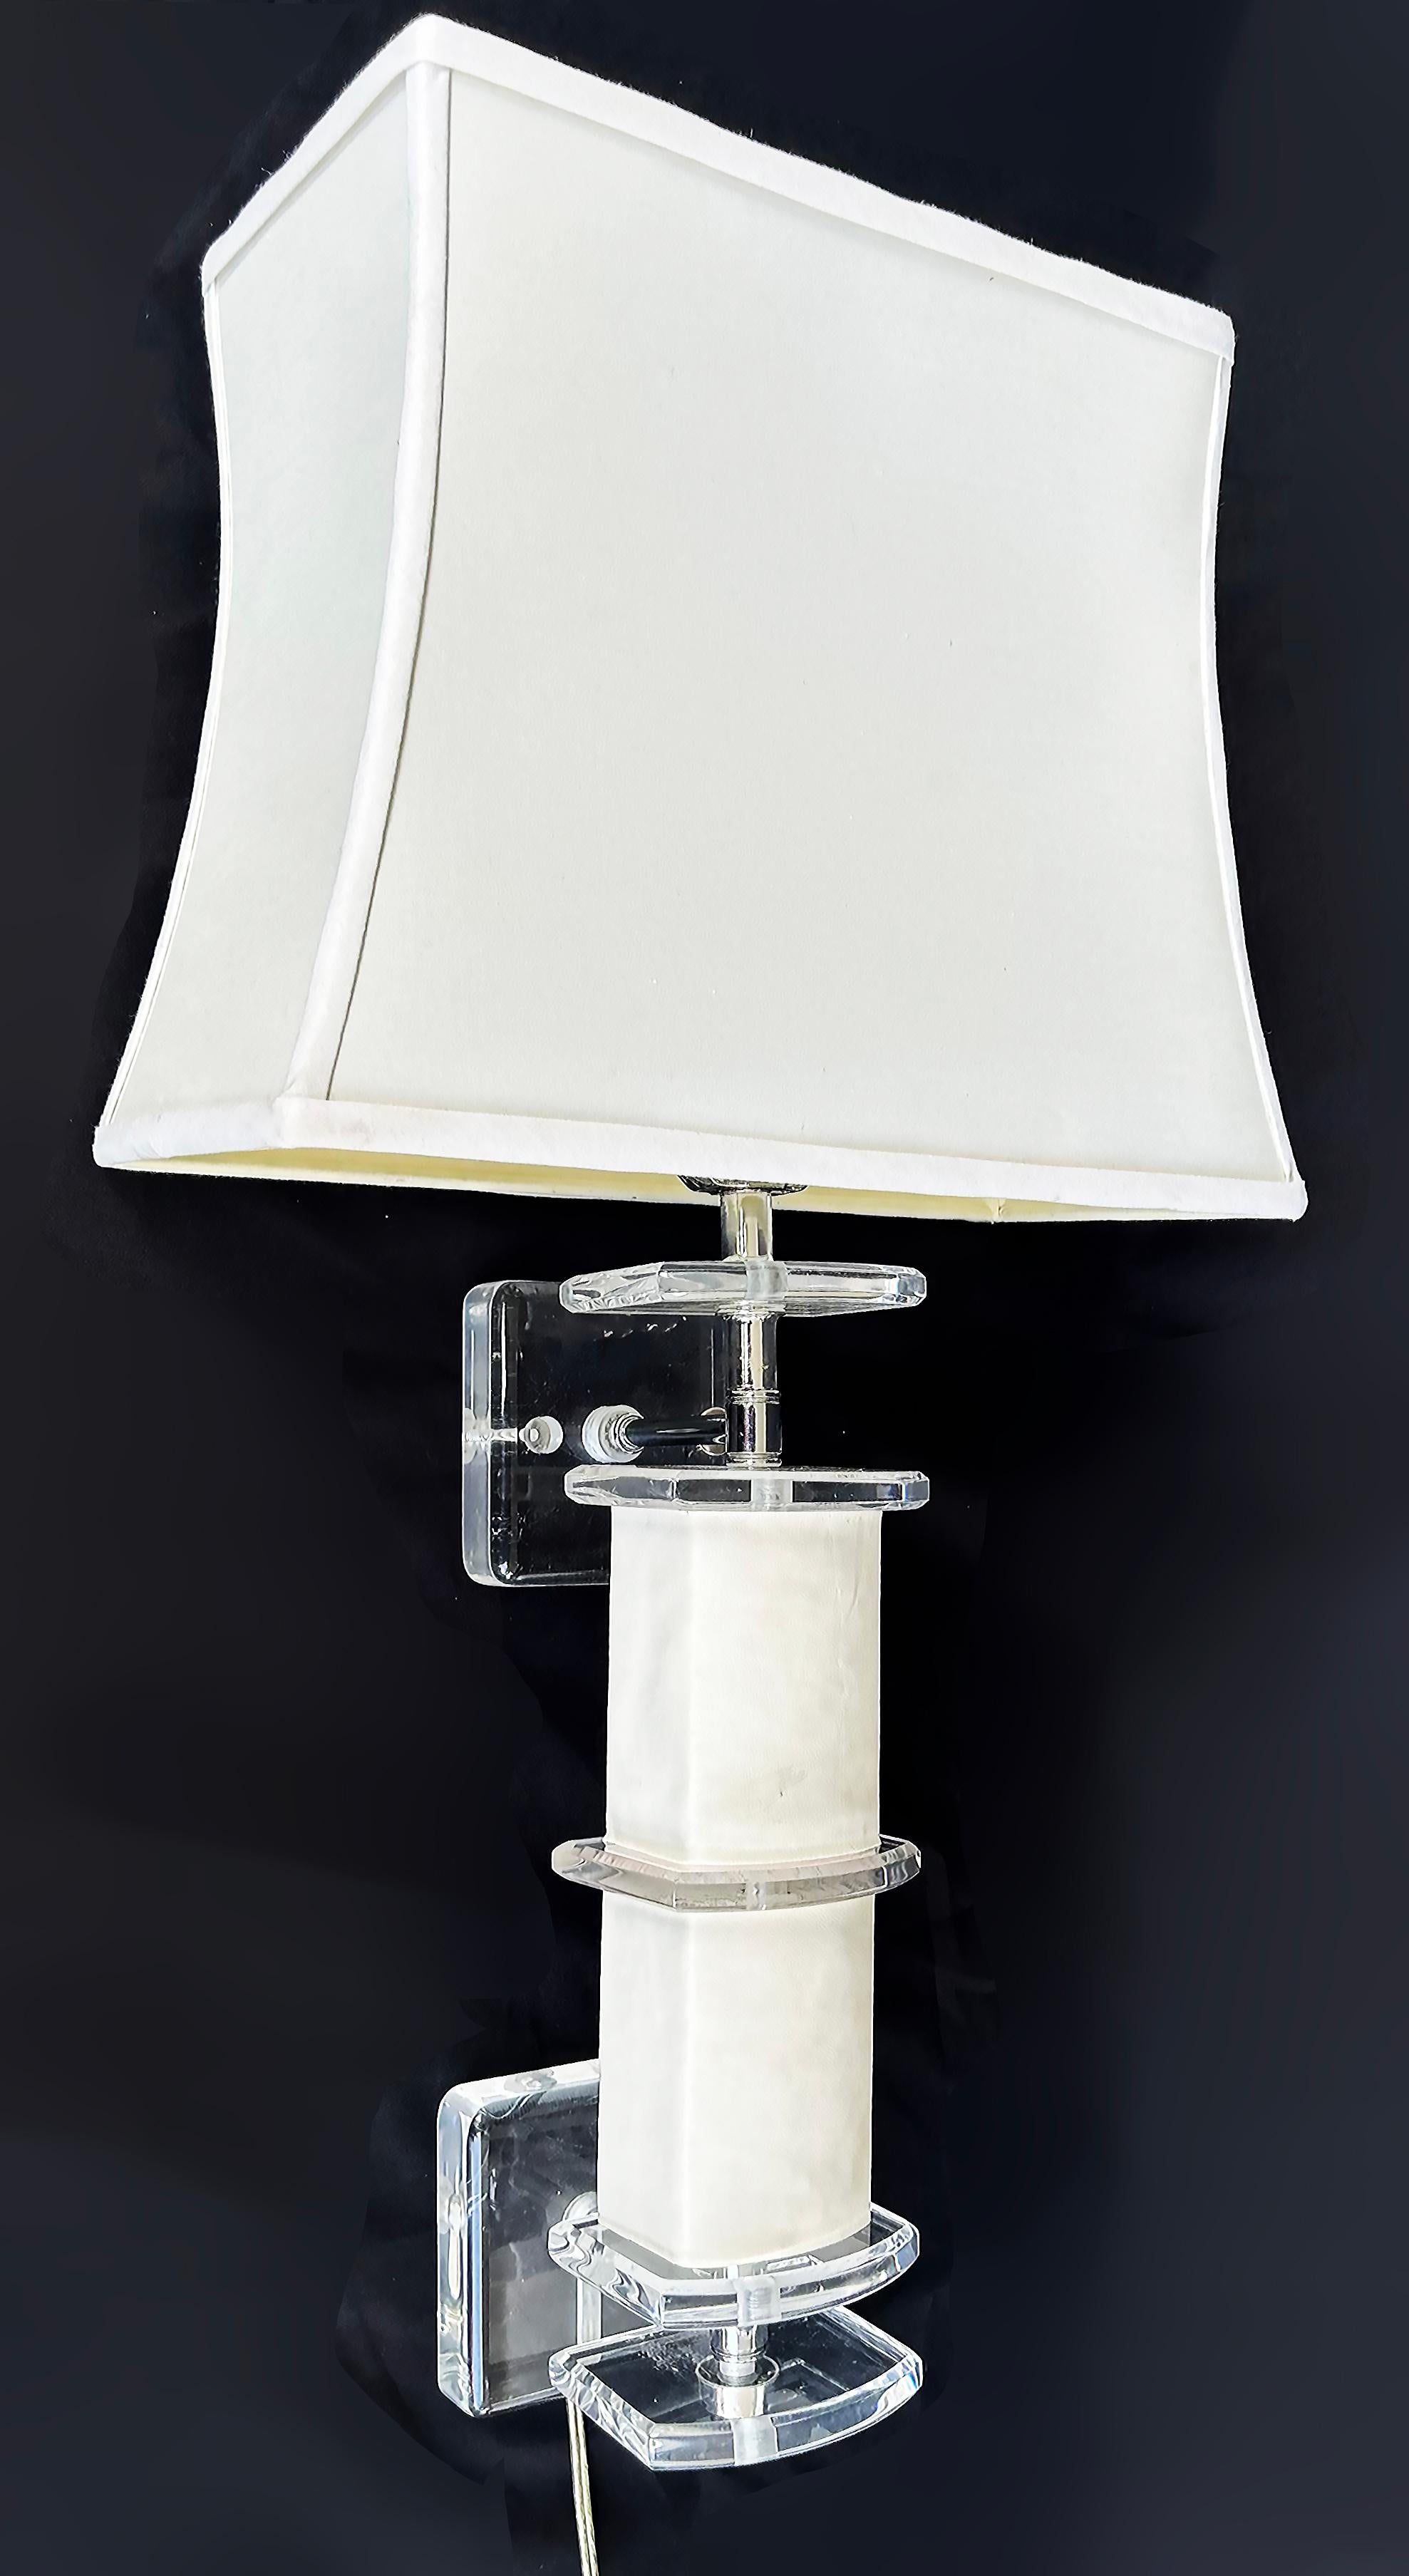 Vintage Lucite Wall Sconces with Faux Leather, Lucite Finials, and Lampshades

Offered for sale is a pair of vintage Lucite wall sconces with their original Lucite finials and shades. The sconces have columns wrapped in faux leather with decorative